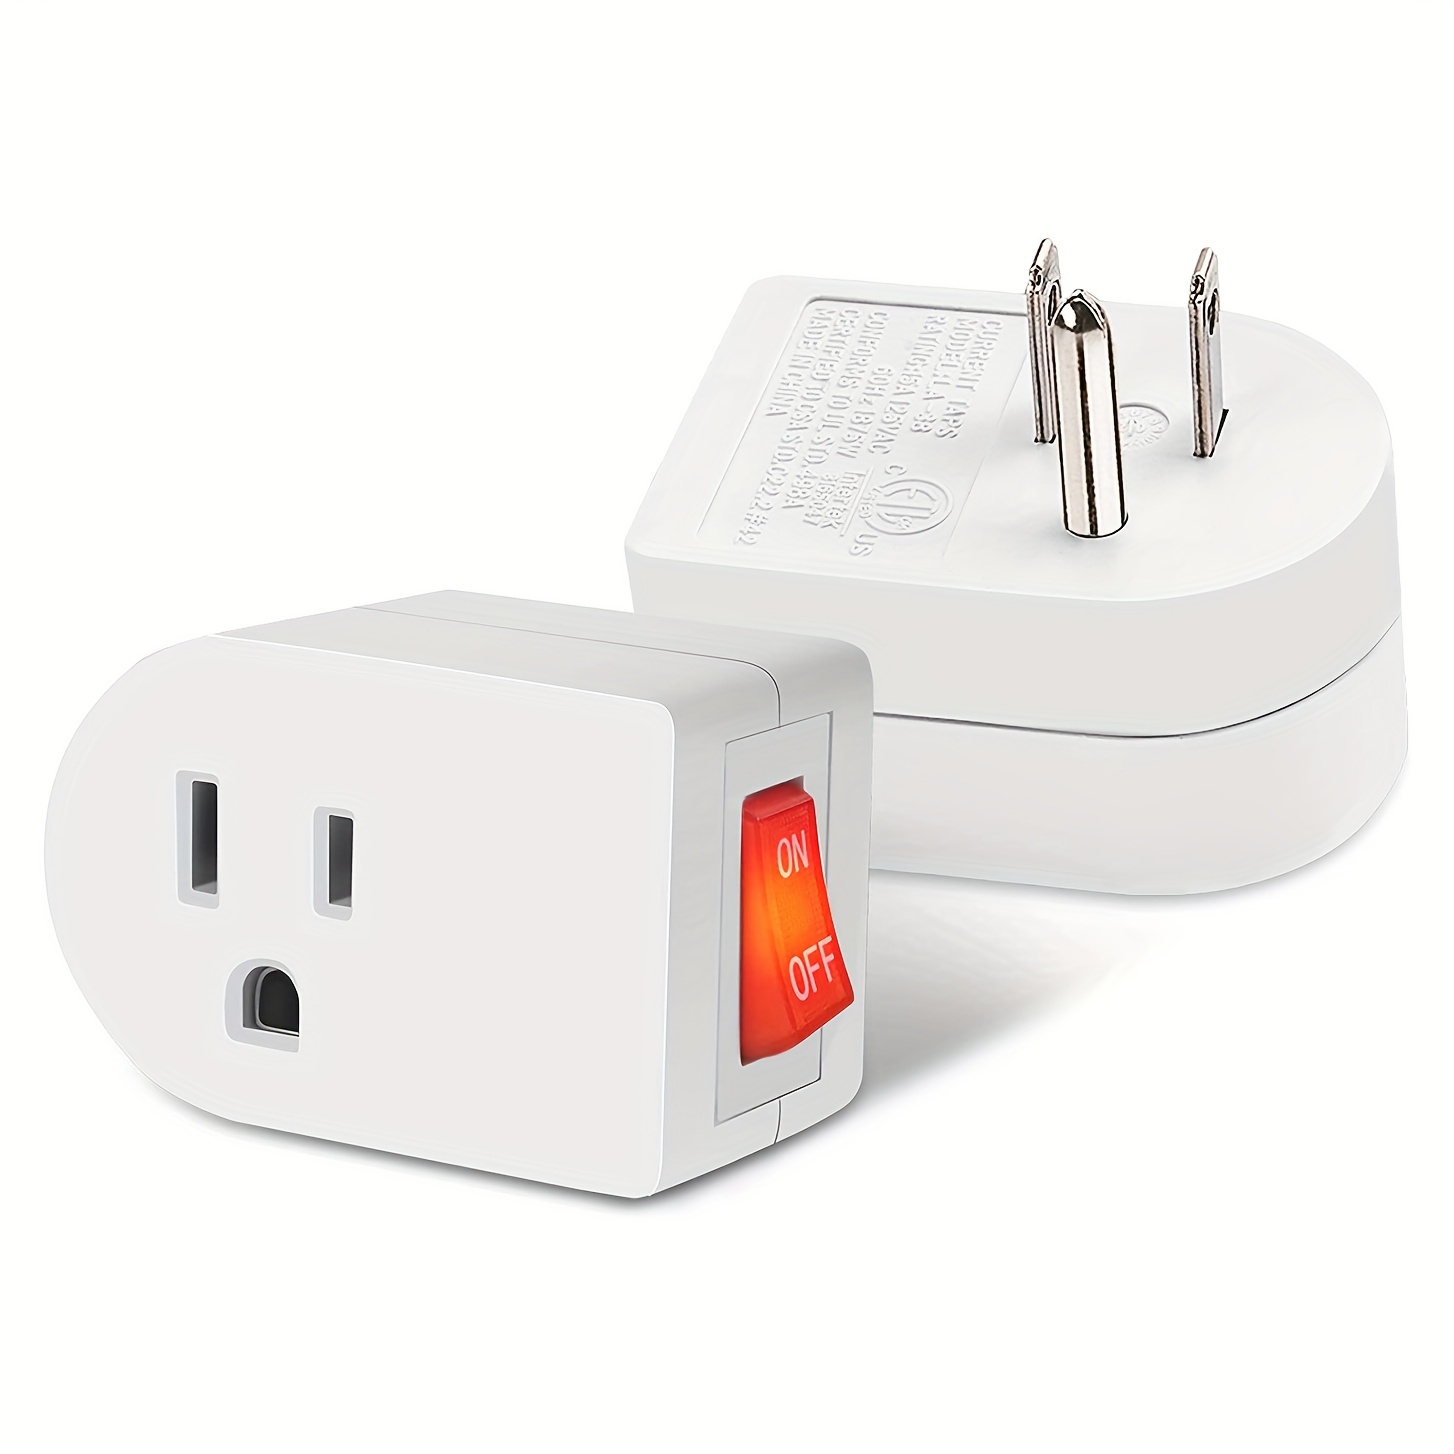 Mini Smart Plug, Smart Outlet Work with Alexa and Google Home, Voice  Control, Remote Control, FCC Certified, Vesync APP, 2.4G WiFi Only, 10 Amp,  Wi-Fi Outlet,No Hub Required.